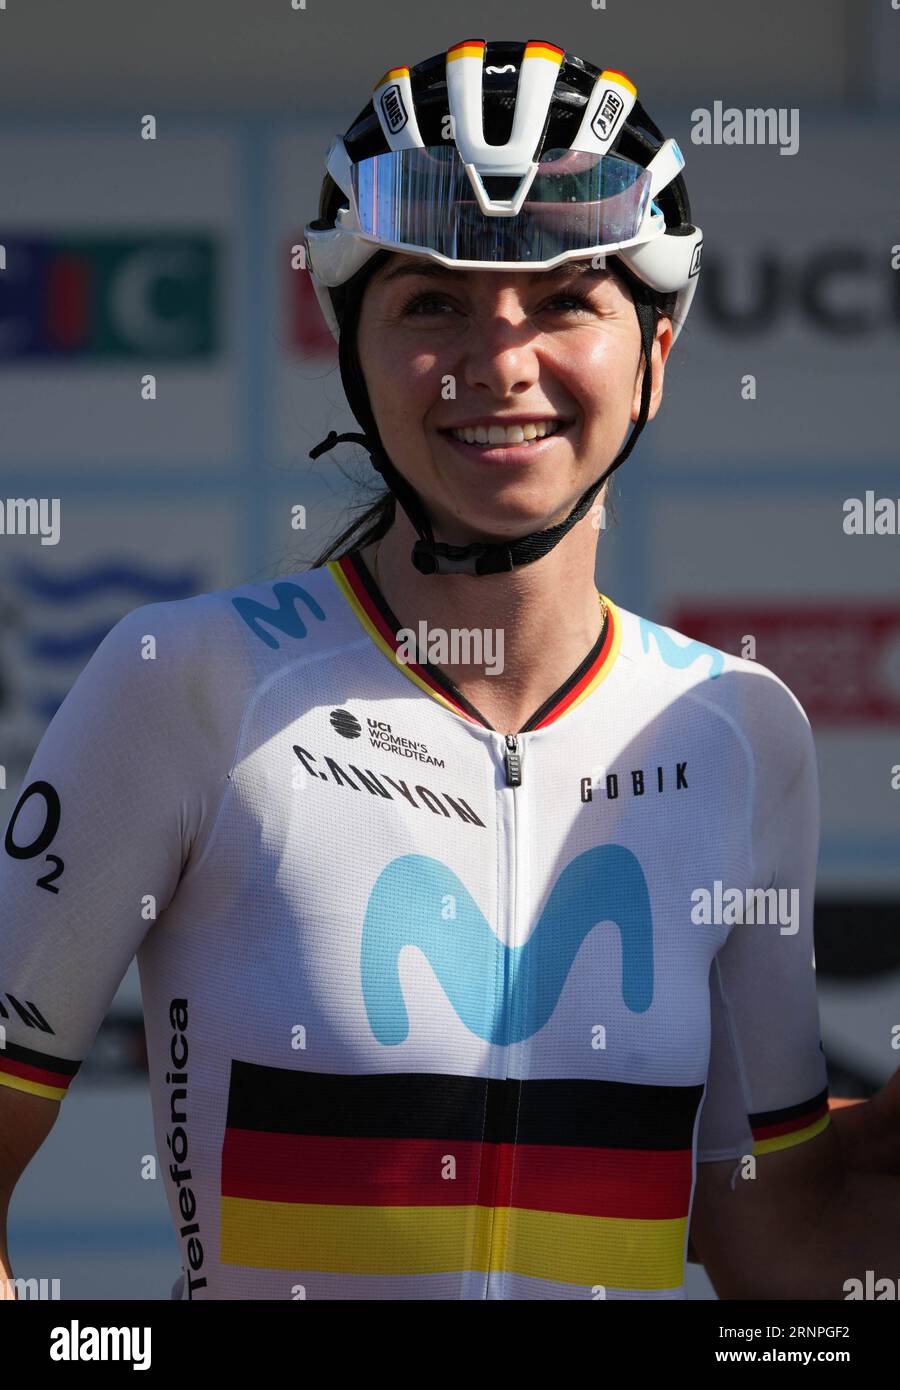 Plouay, France. 02nd Sep, 2023. Liane Lippert of Movistar Team Women during the Classic Lorient Agglomération - Trophée Ceratizit, UCI Women's World Tour cycling race on September 2, 2023 in Plouay, France. Photo by Laurent Lairys/ABACAPRESS.COM Credit: Abaca Press/Alamy Live News Stock Photo